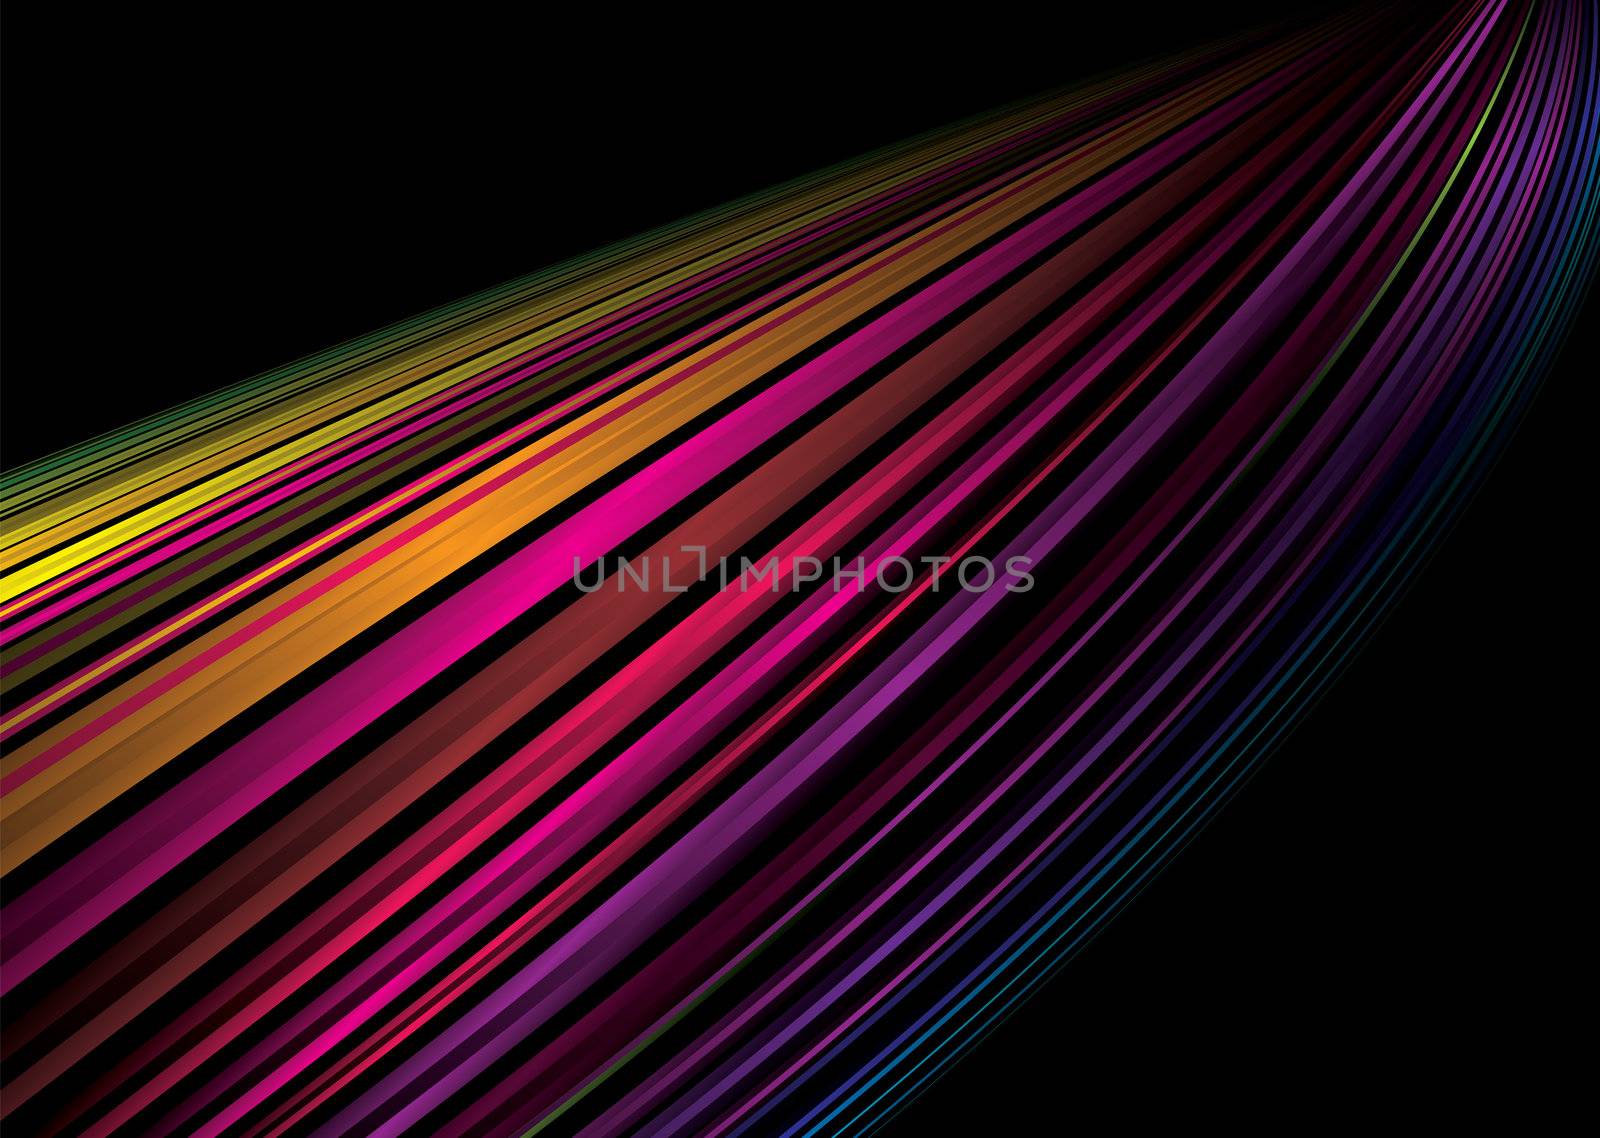 Abstract illustrated rainbow background with a black backdrop